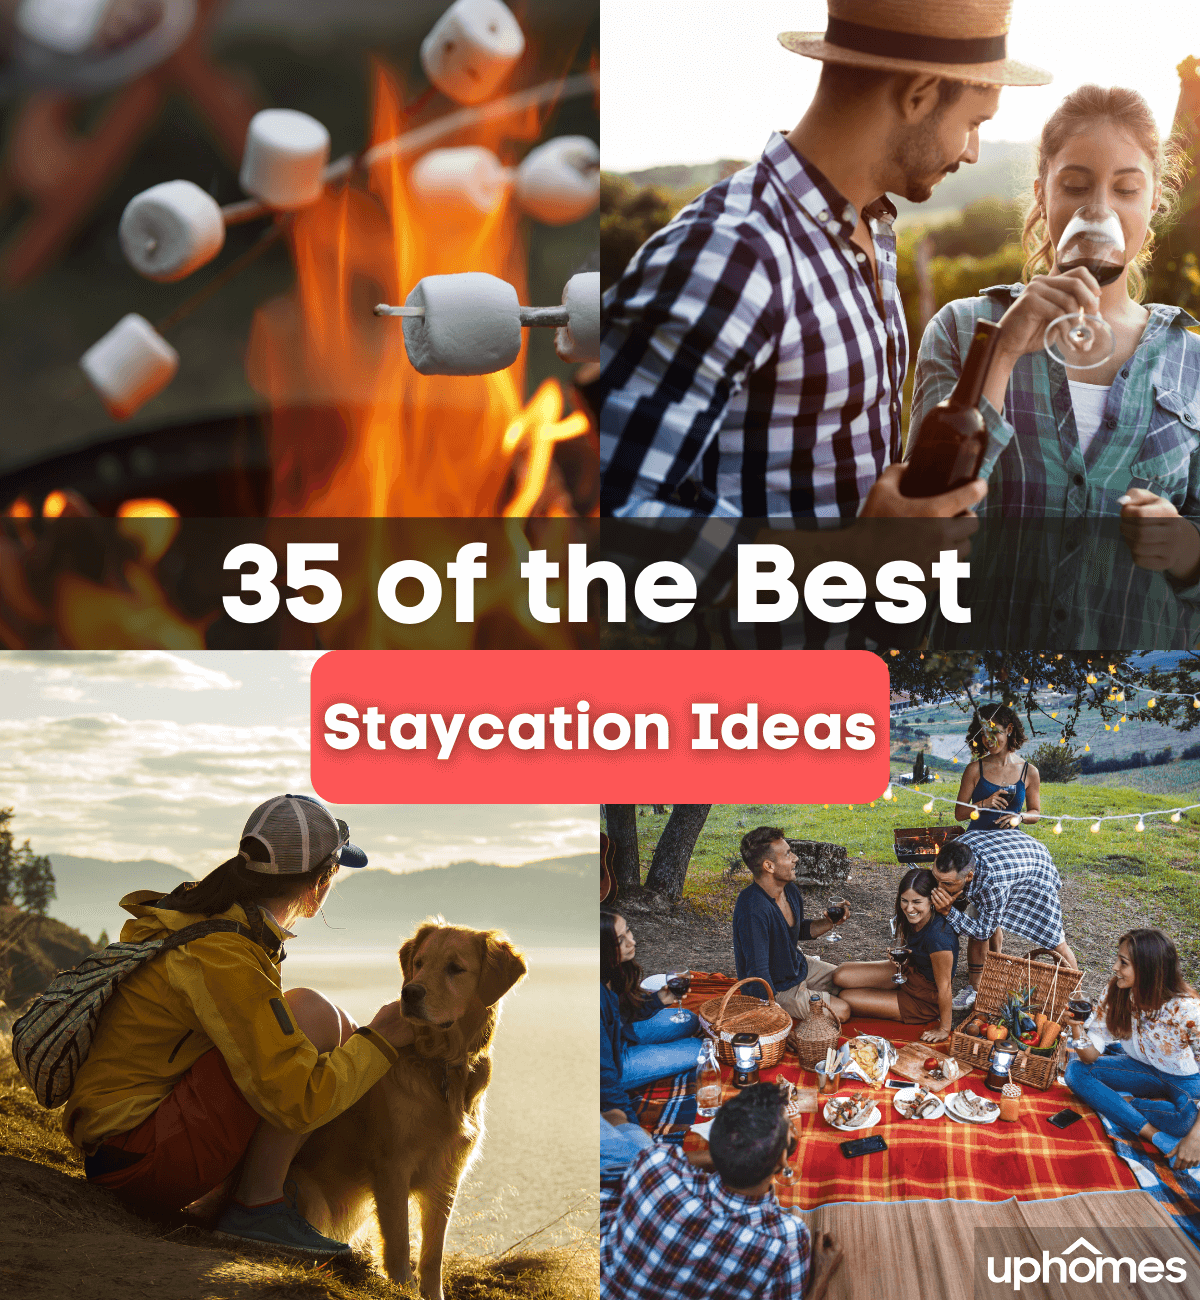 35 of the Best Staycation Ideas - For Couples, For Families, For Kids Here are The Best Staycation ideas